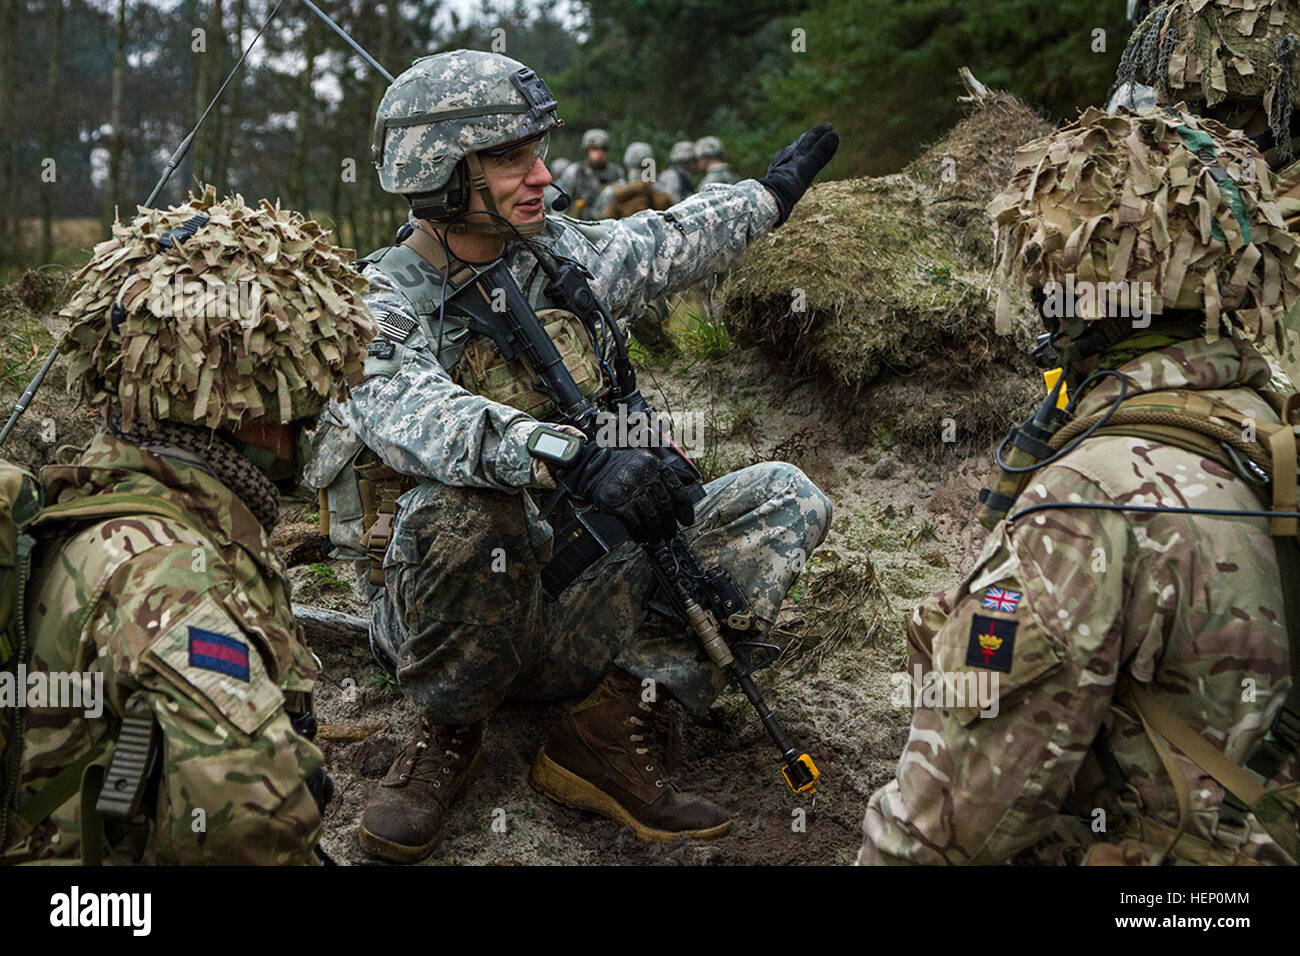 U.S. Army Capt. Nicolas Salimbene, commander of Company B, 1st Battalion, 503rd Infantry Regiment, 173rd Airborne Brigade, directs British soldiers from Queens Company, Grenadier Guards, where to attack the opposing force during Exercise White Sword here, Dec. 3, 2014. Exercise White Sword is a multinational exercise involving over 1,500 NATO troops from Denmark, U.K. and the U.S., and designed increase interoperability between allied forces and certify the Danish 2nd Brigade RBG for the 2015 NATO Reaction Force. (U.S. Army Photo by Sgt. Benjamin John) Exercise White Sword 141204-A-DS355-163 Stock Photo